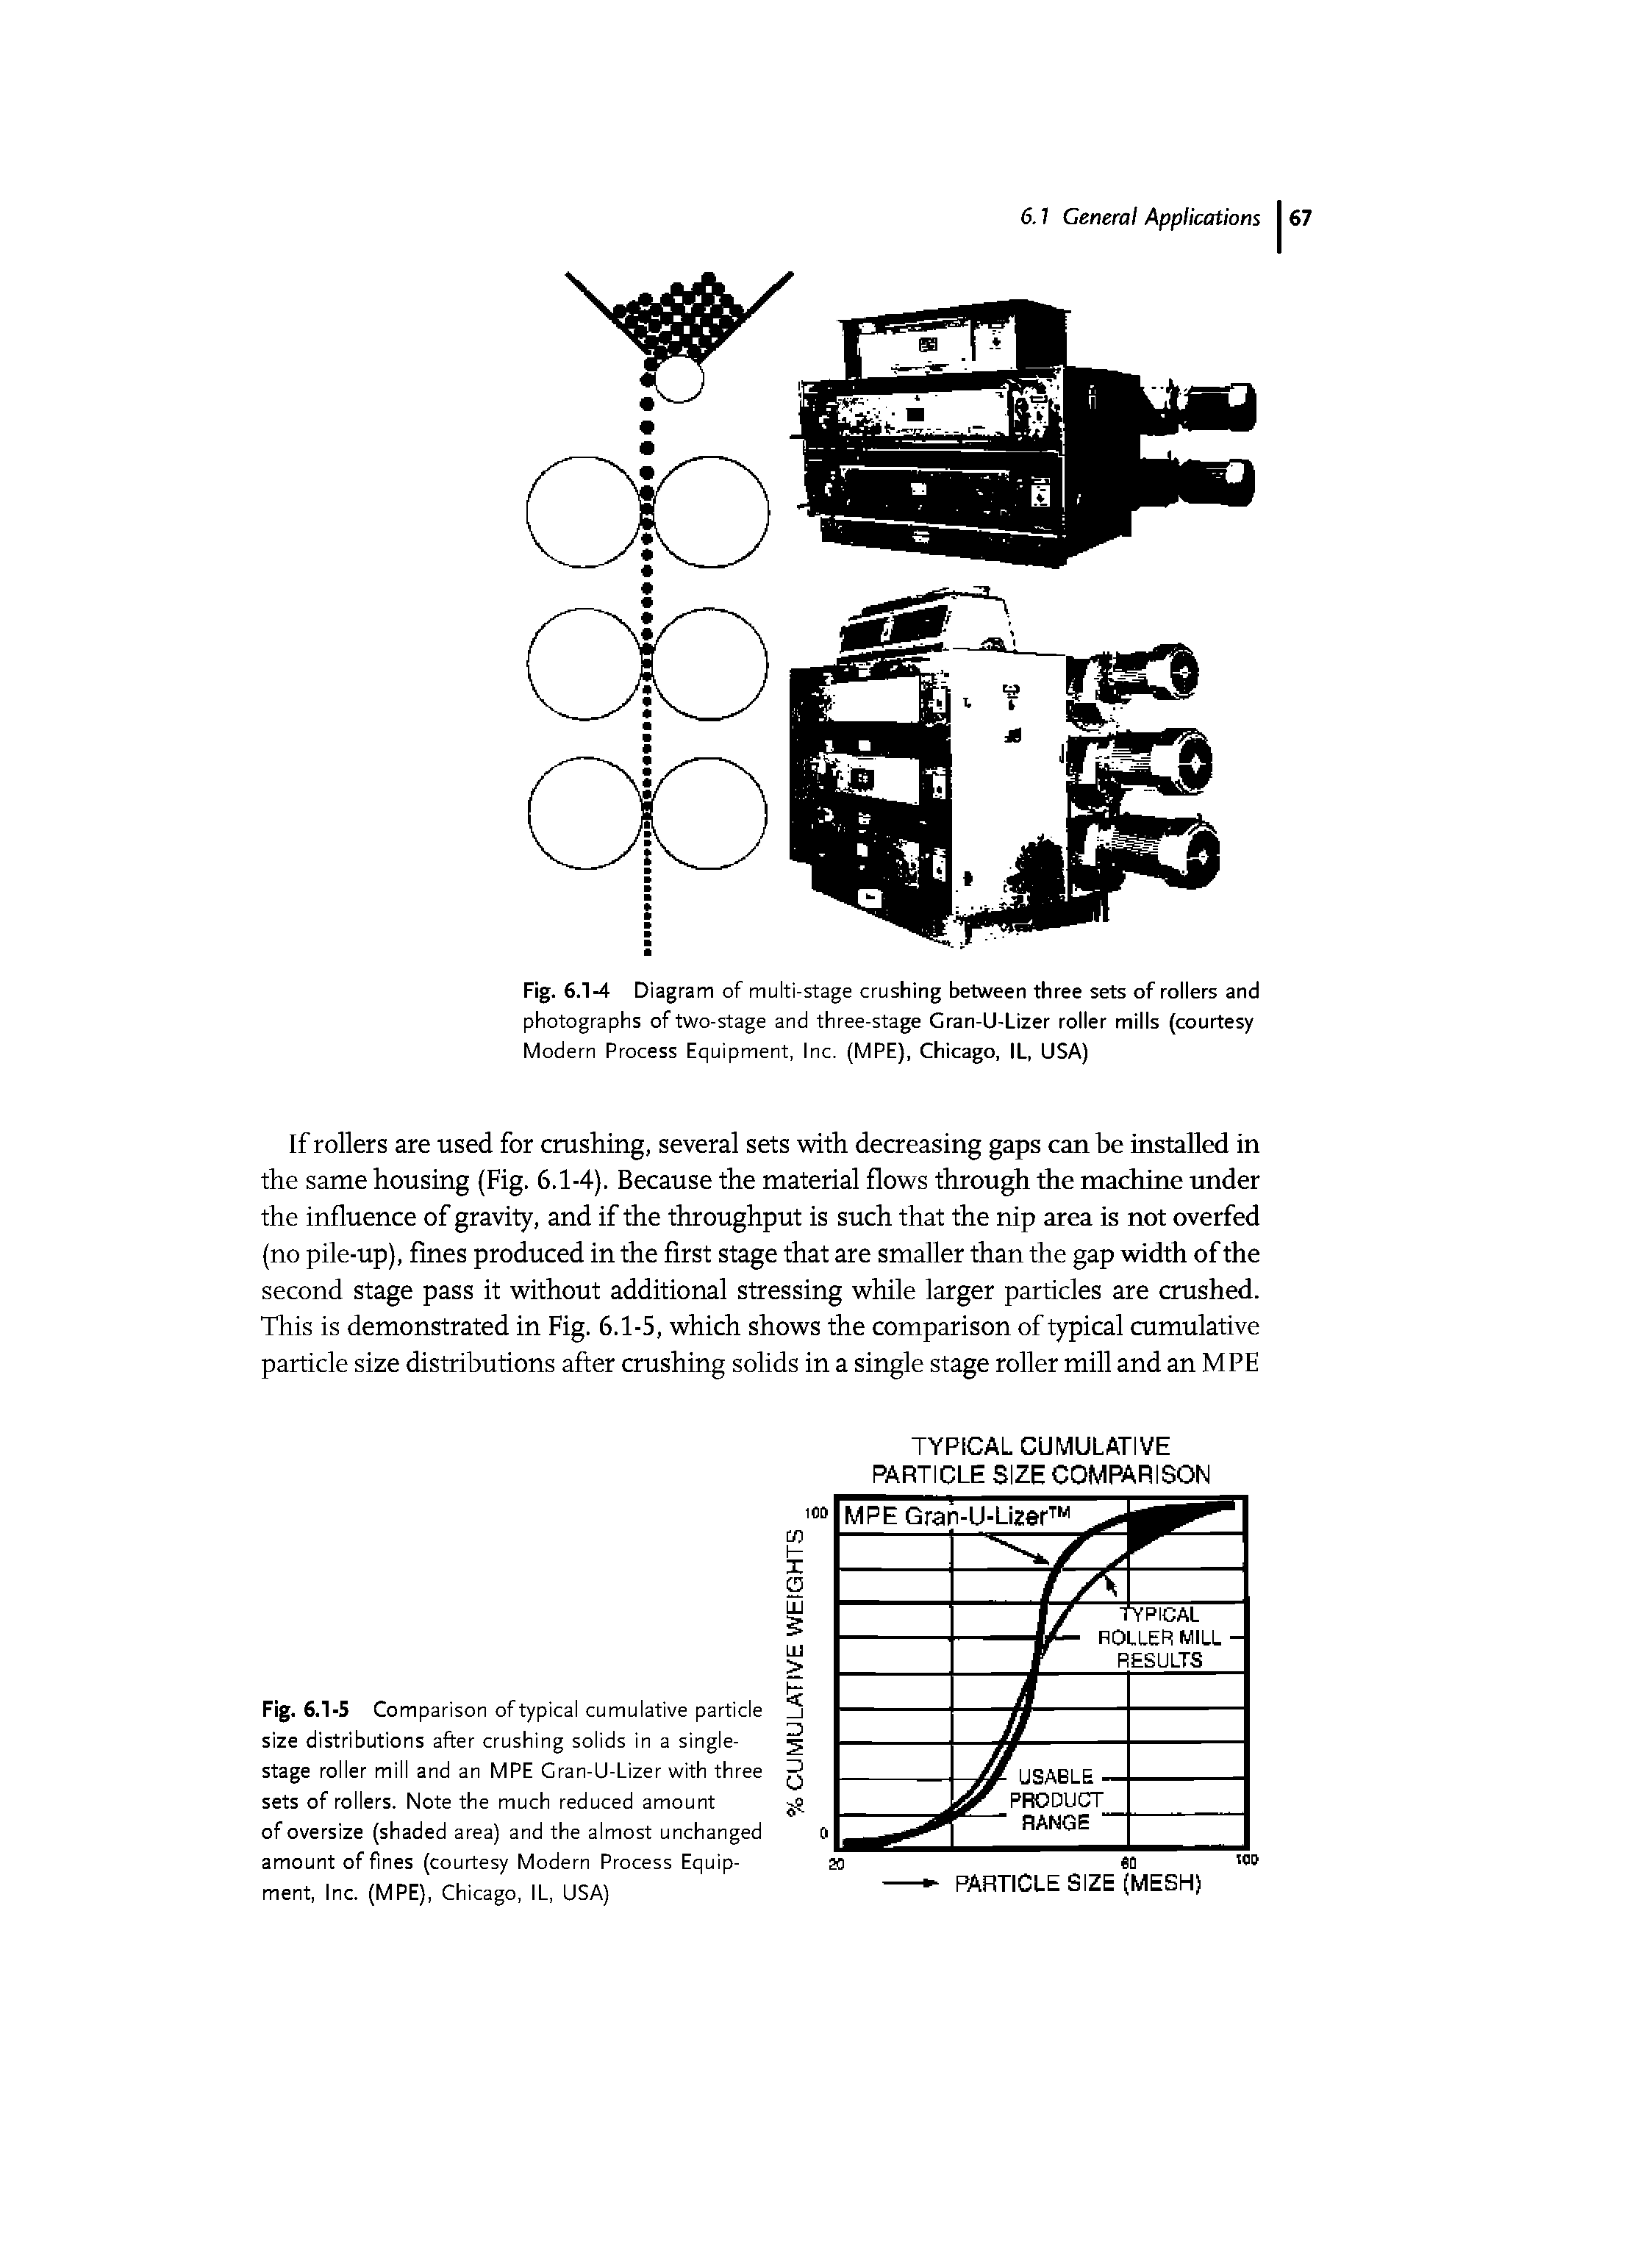 Fig. 6.1-S Comparison of typical cumulative particle size distributions after crushing solids in a single-stage roller mill and an MPE Cran-U-Lizer with three sets of rollers. Note the much reduced amount of oversize (shaded area) and the almost unchanged amount of fines (courtesy Modern Process Equipment, Inc. (MPE), Chicago, IL, USA)...